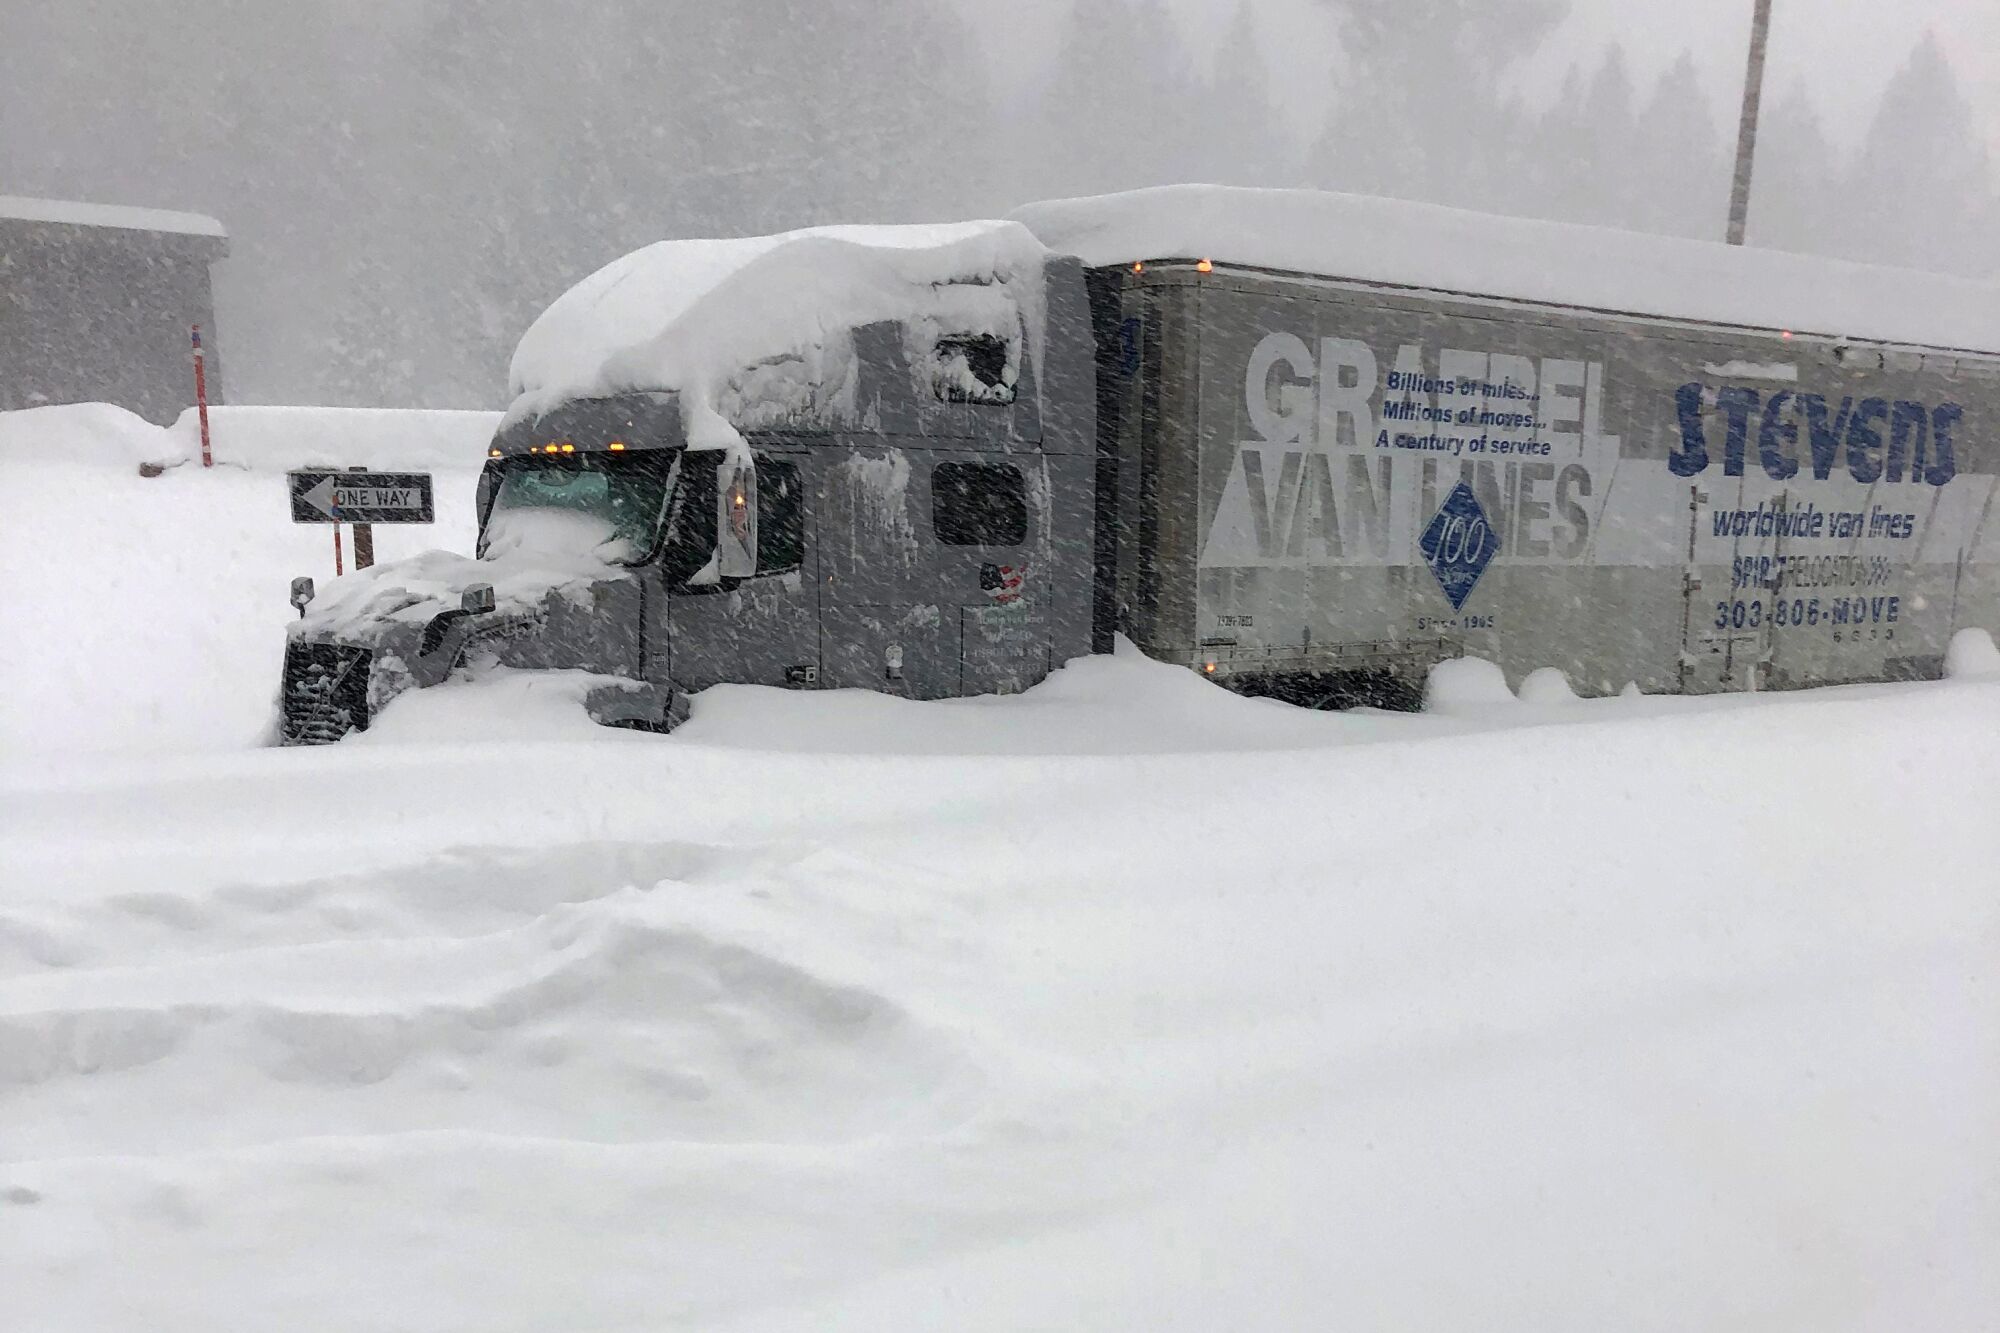 A tractor trailer that is stuck in Crestview along U.S. 395.